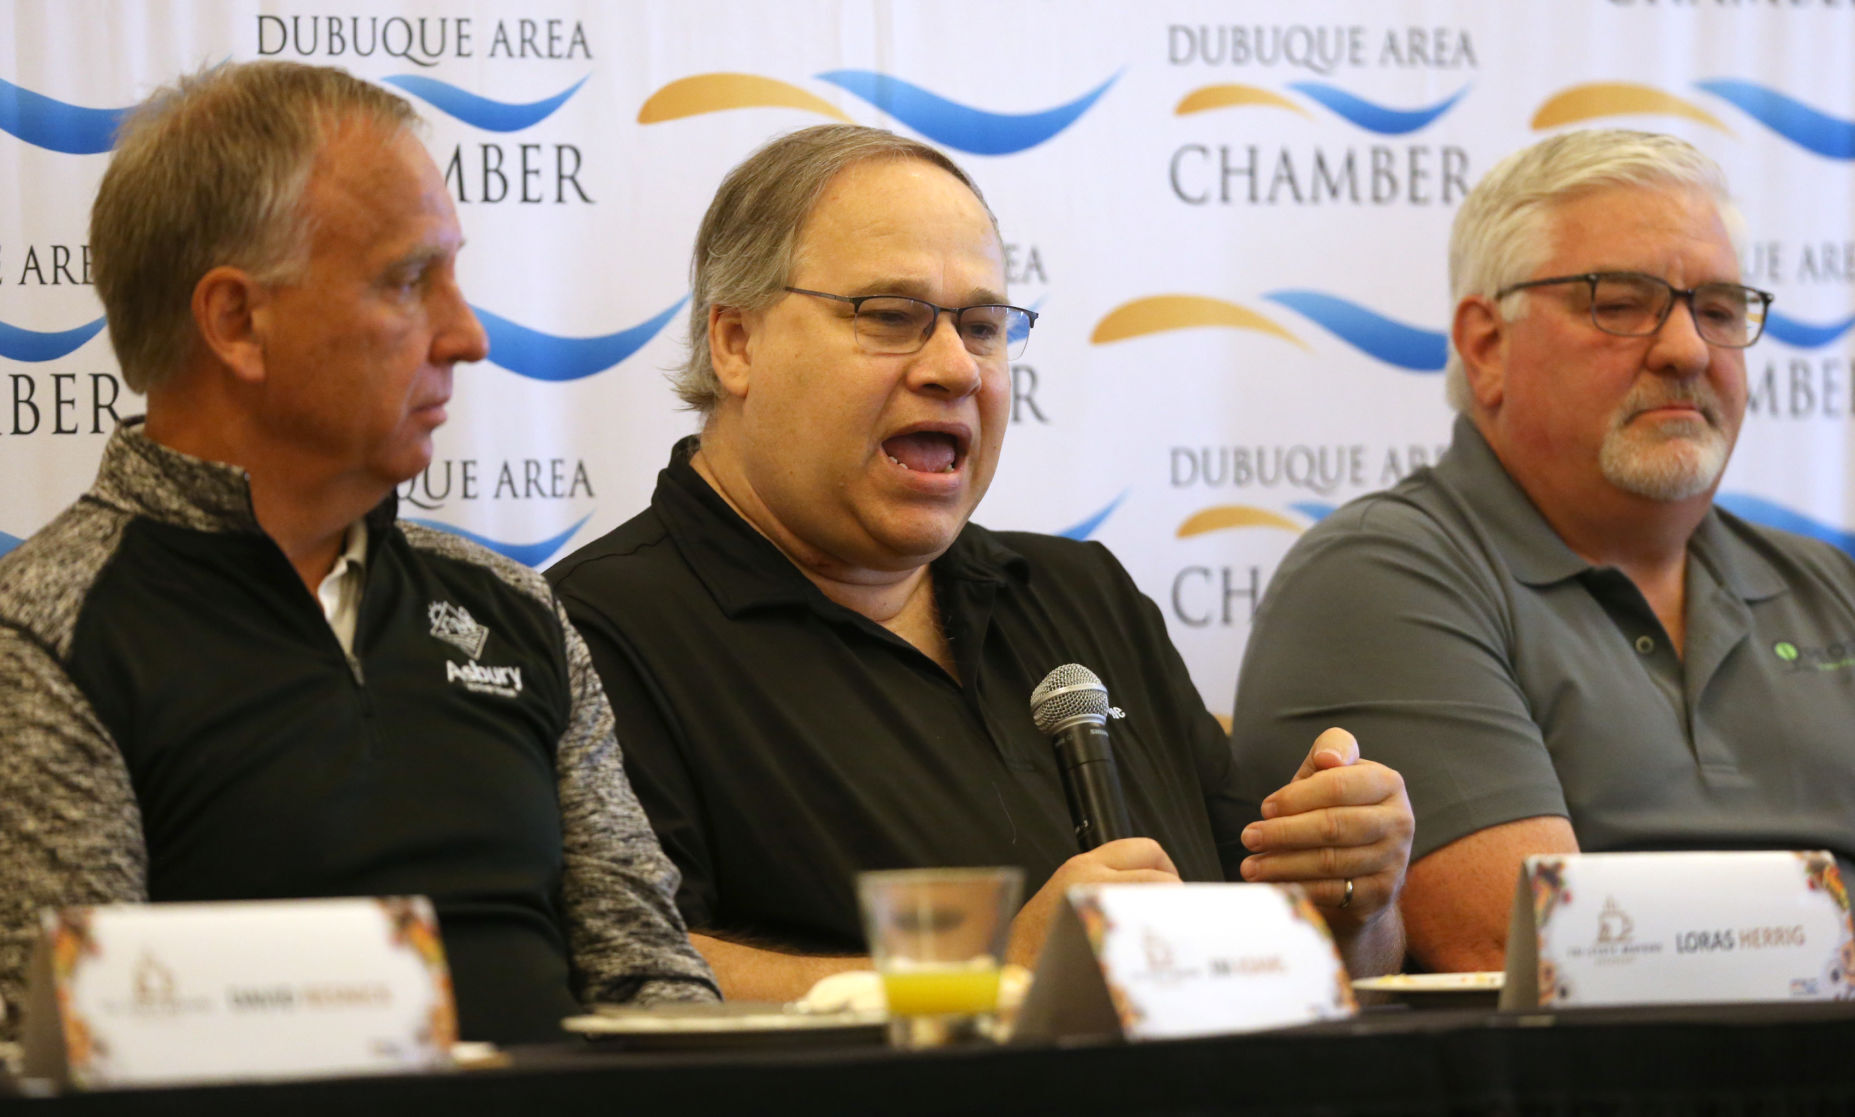 East Dubuque, Ill., City Administrator Loras Herrig speaks during the Dubuque Area Chamber of Commerce